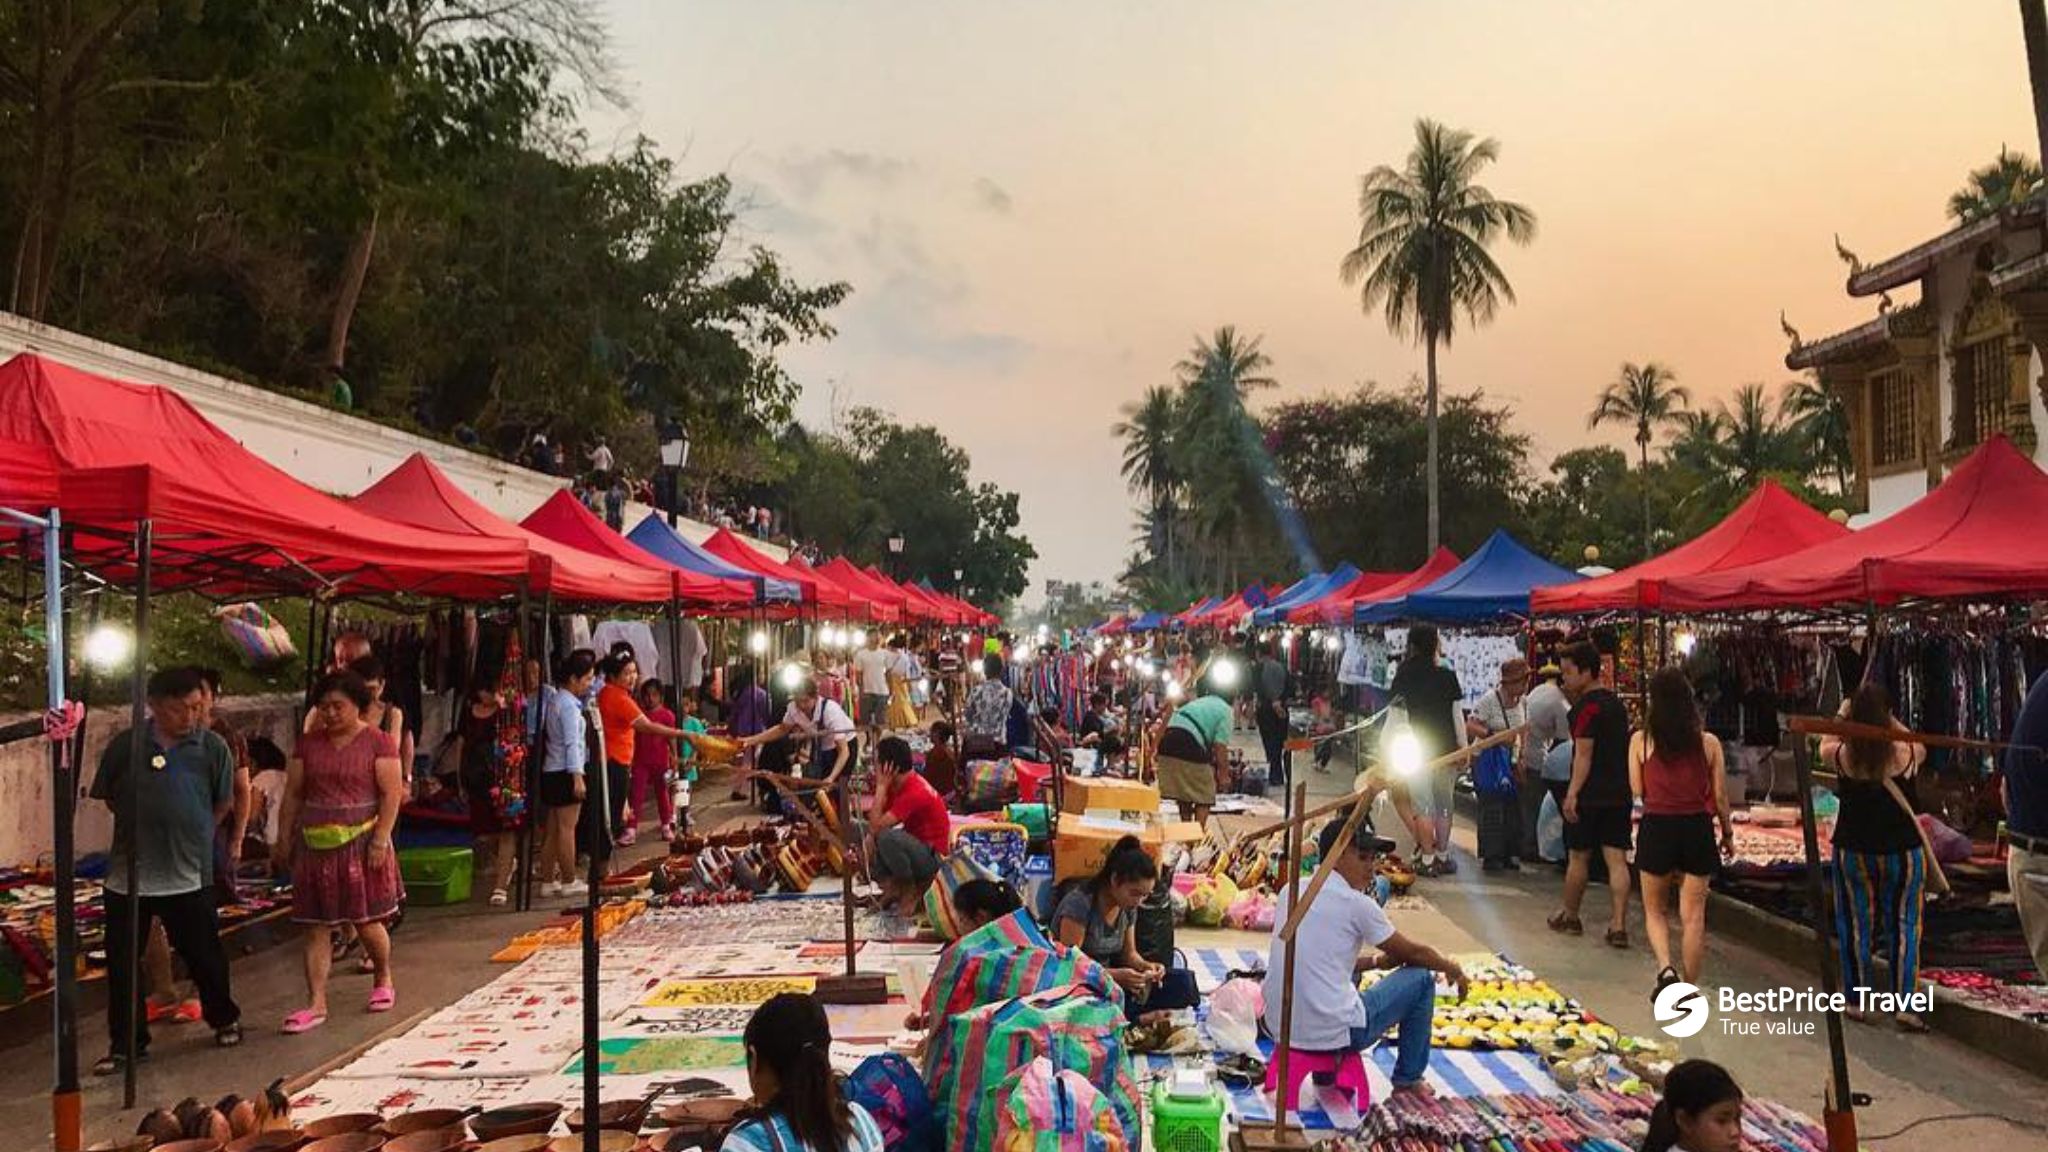 Buy Handmade Textiles At The Local Night Market